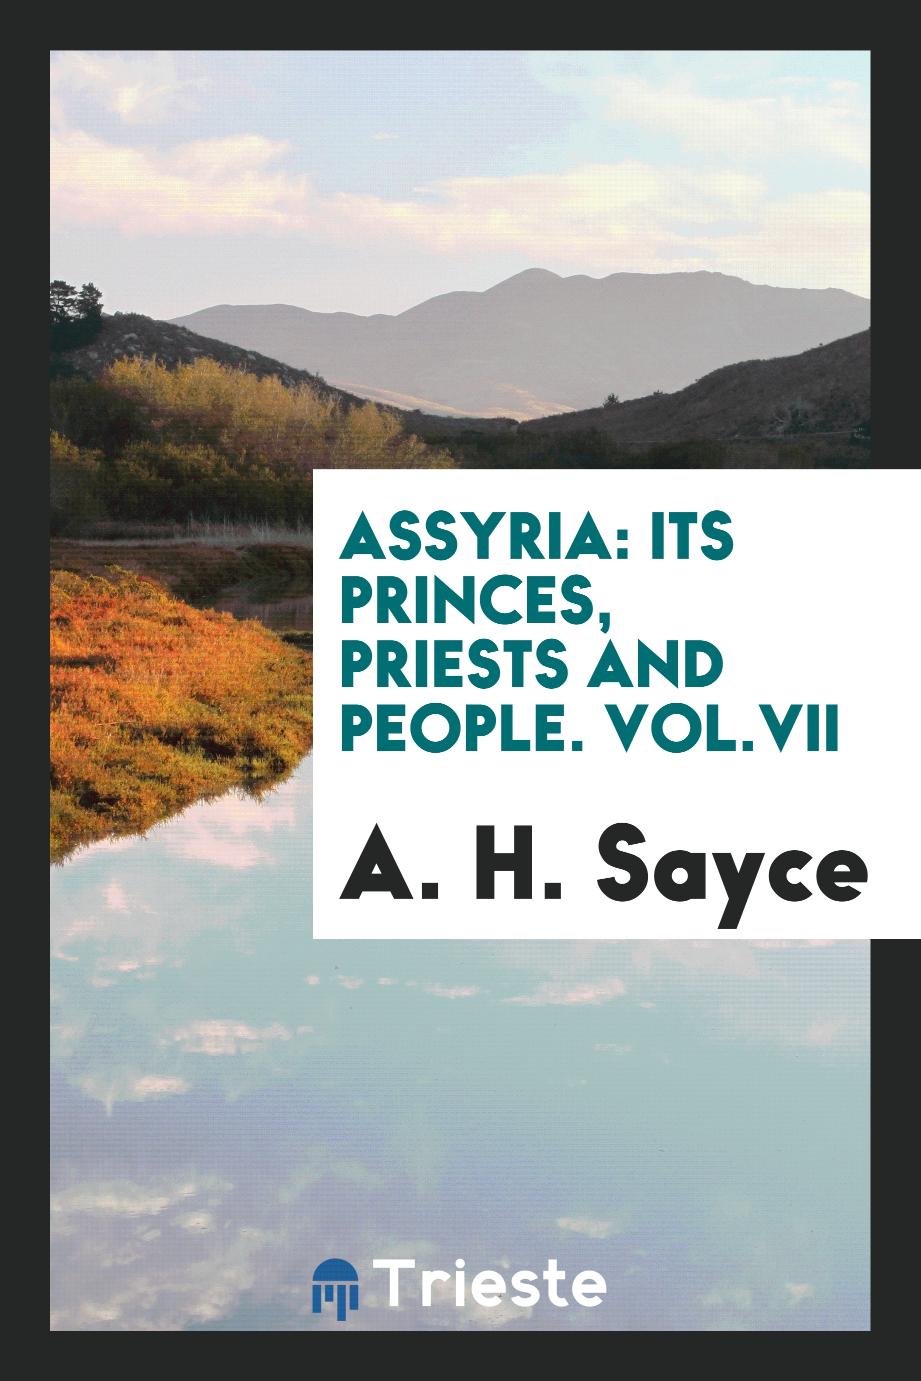 Assyria: Its Princes, Priests and People. Vol.VII